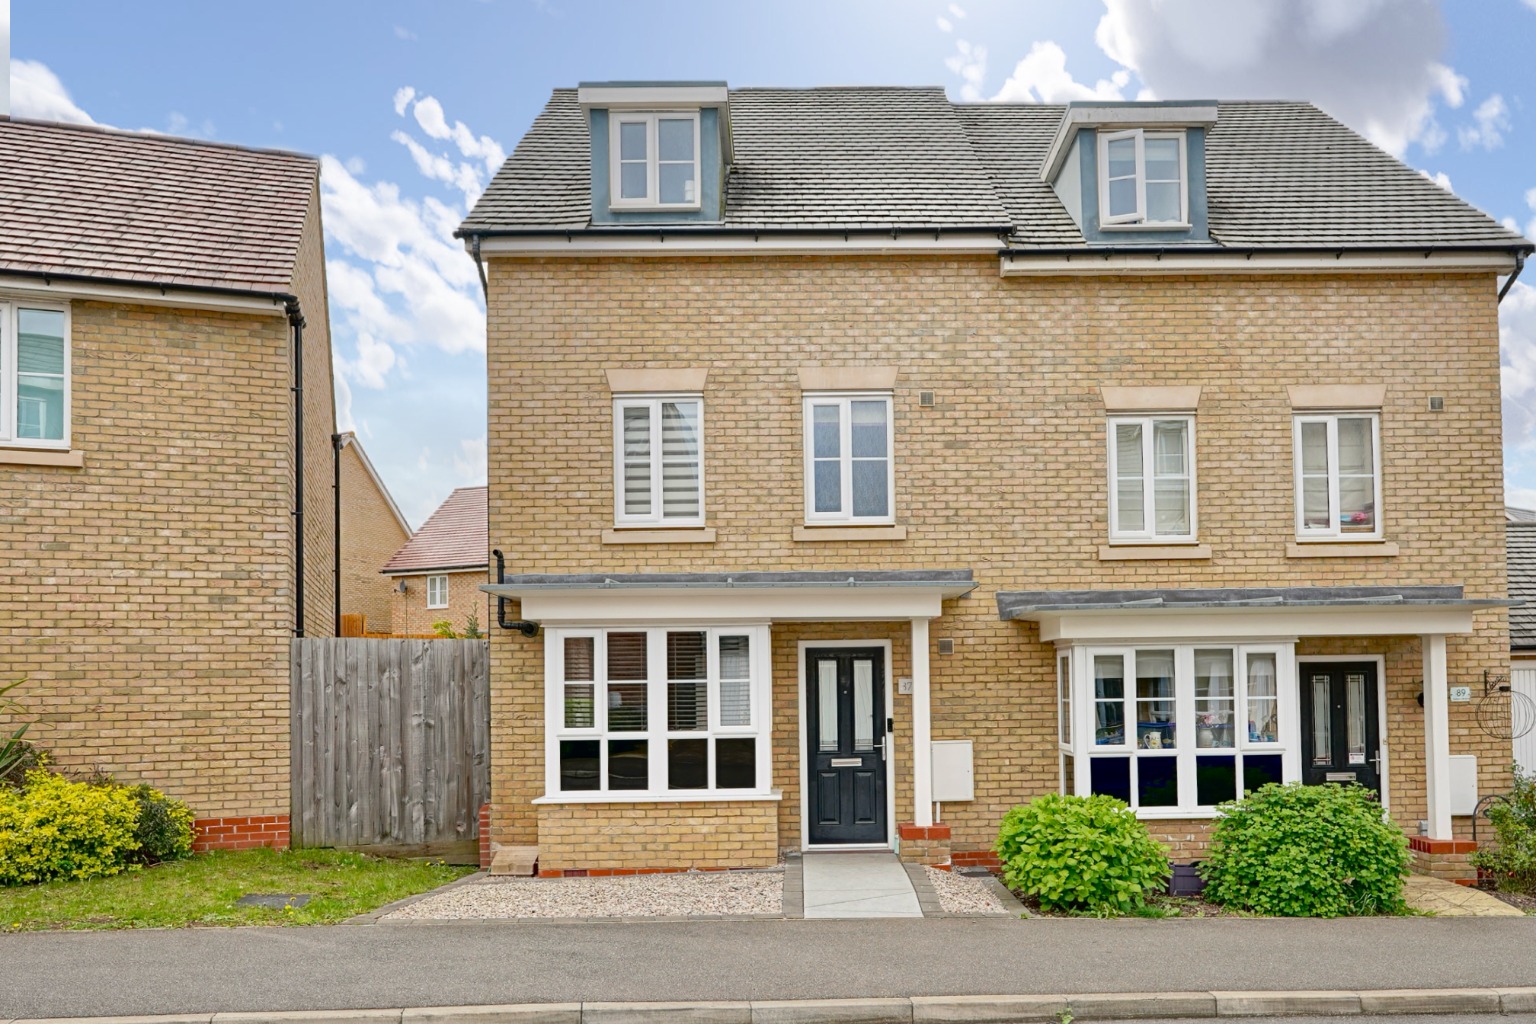 4 bed semi-detached house for sale in Summer's Hill Drive, Cambridge - Property Image 1